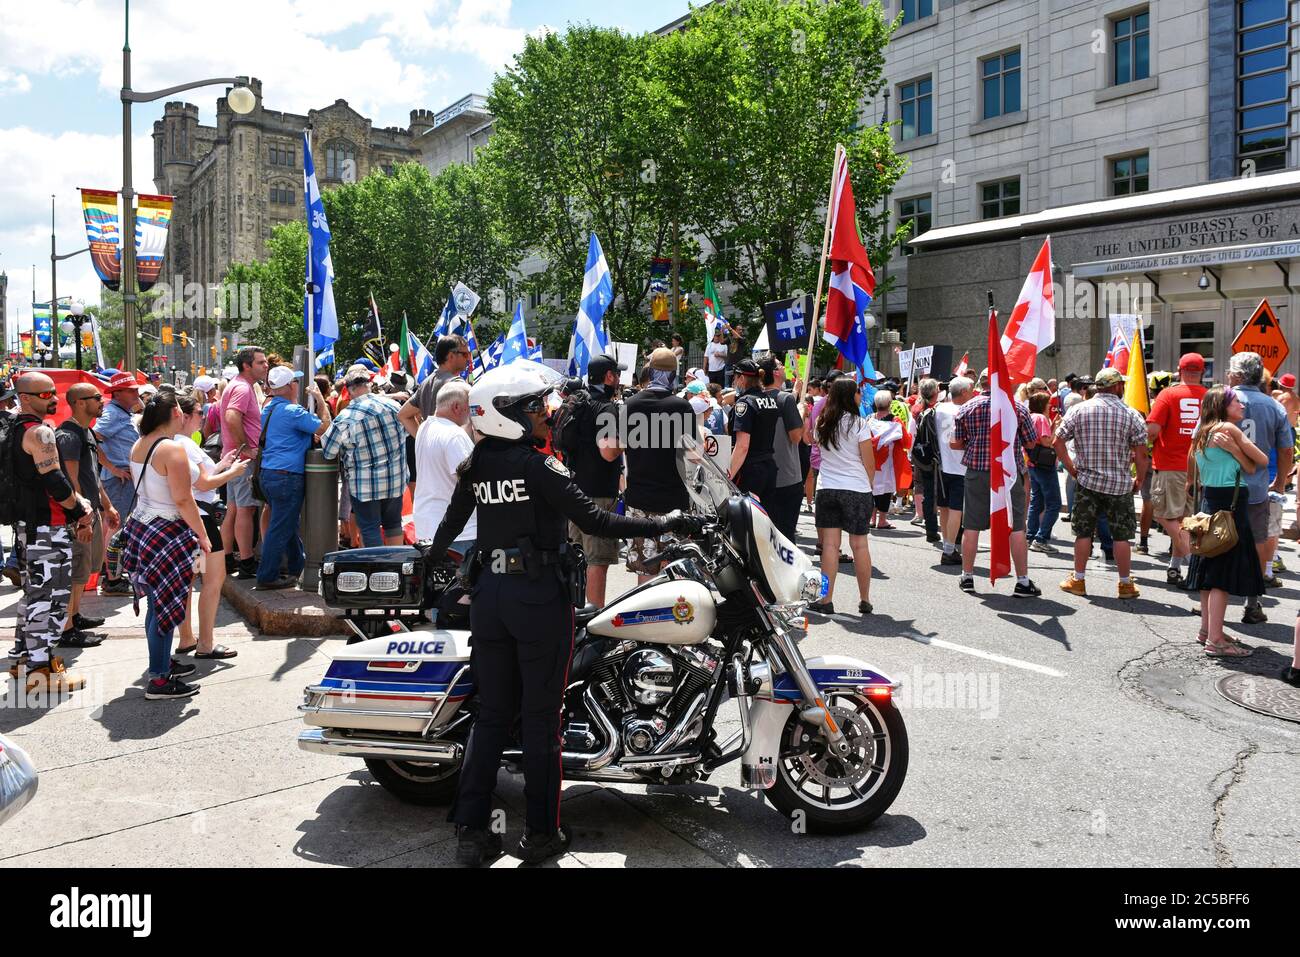 Ottawa, Canada - July 1, 2020: Protesters and counter protesters gather in front of the US Embassy. The annual Canada Day festivities were cancelled due to the Coronavirus pandemic. Stock Photo